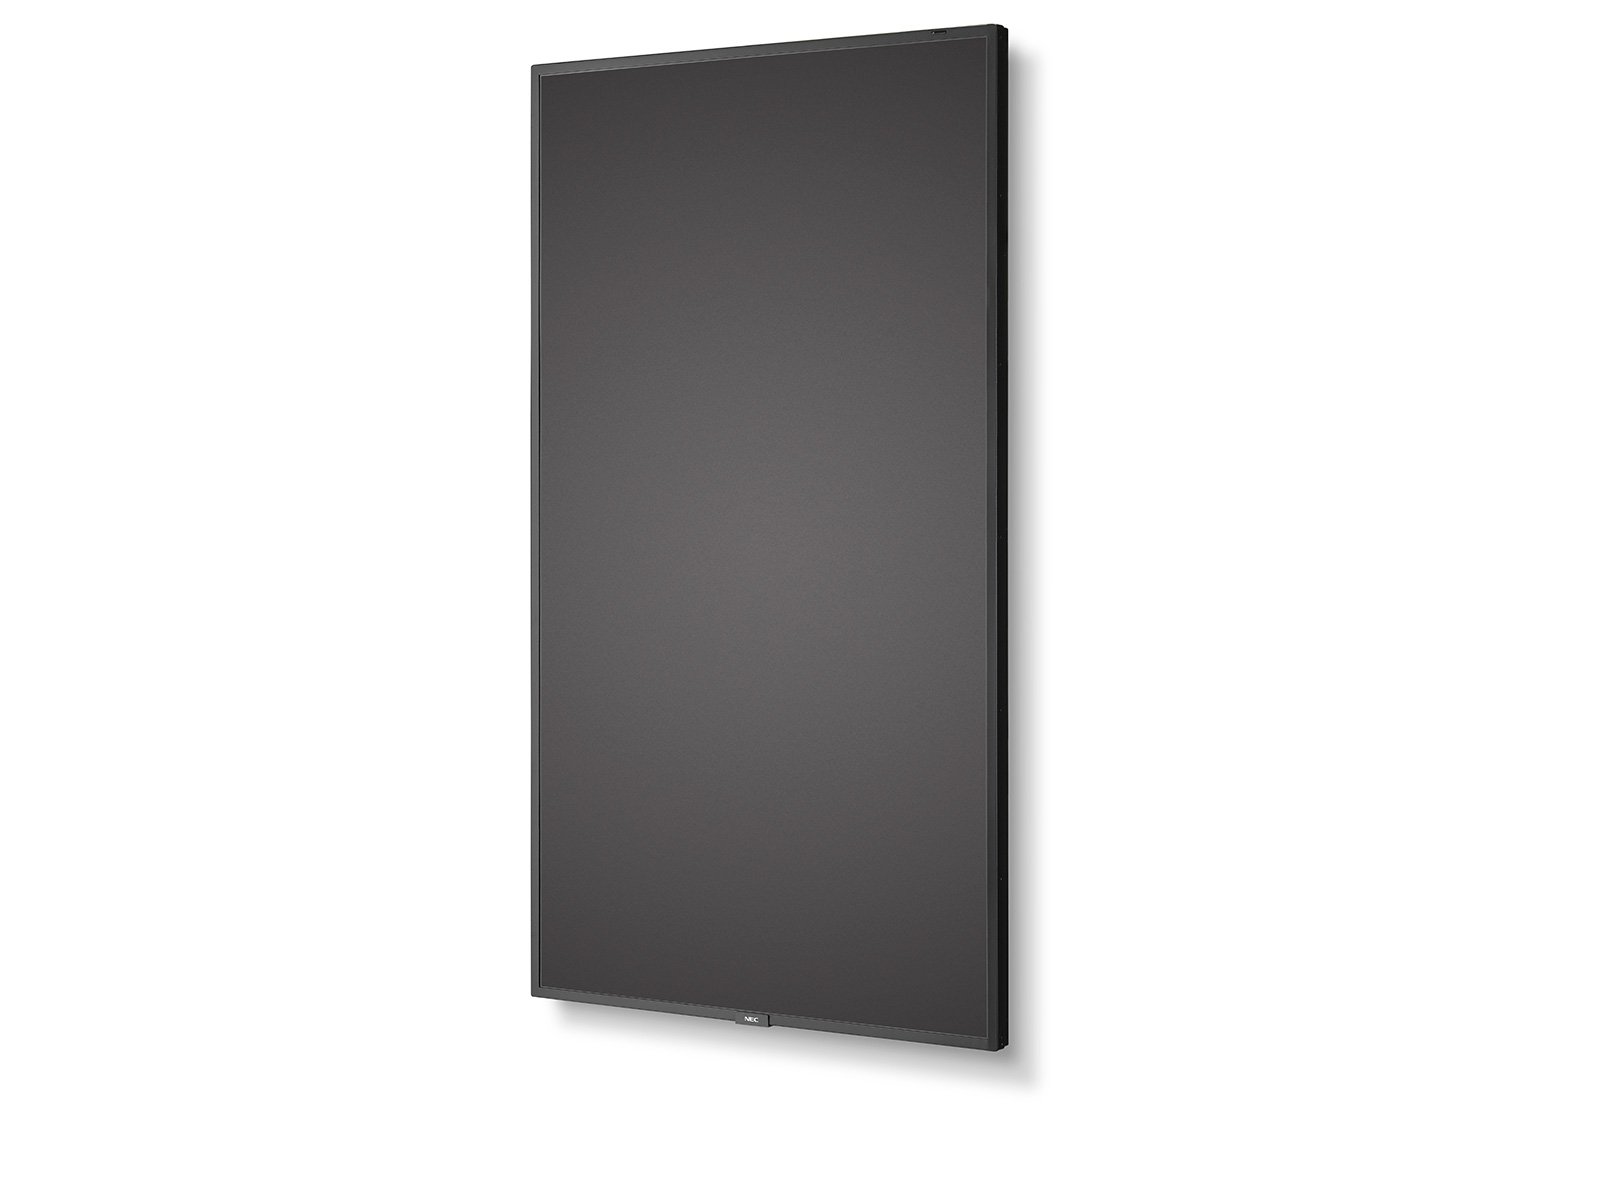 NEC MultiSync ME651 - 65 inch - 400 cd/m² - Ultra-HD - 3840x2160 Pixel - 18/7 - Message Essential Large Format Display